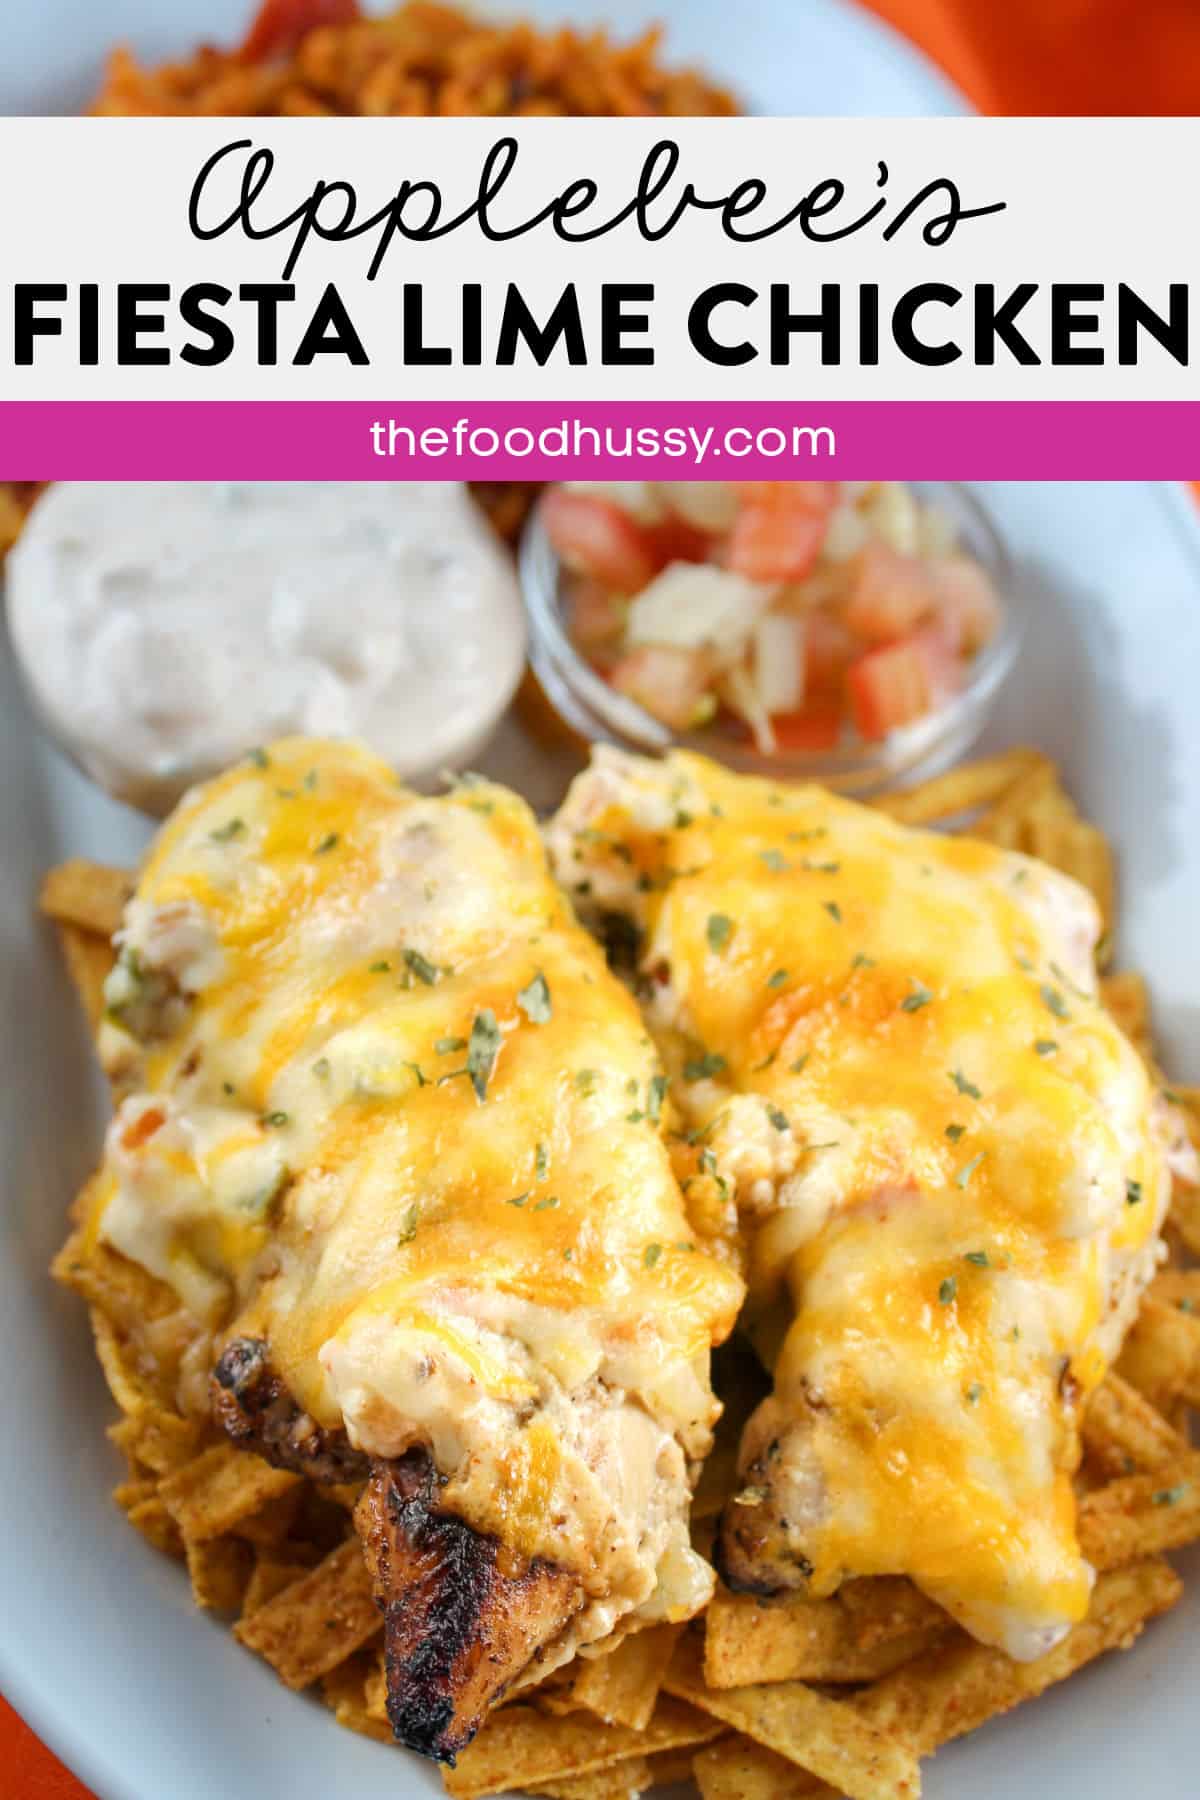 Applebee’s Fiesta Lime Chicken is a celebration of flavor! Grilled chicken with a zippy lime sauce, salsa ranch and cheese – with a side of Spanish Rice – it’s a delish dish! via @foodhussy